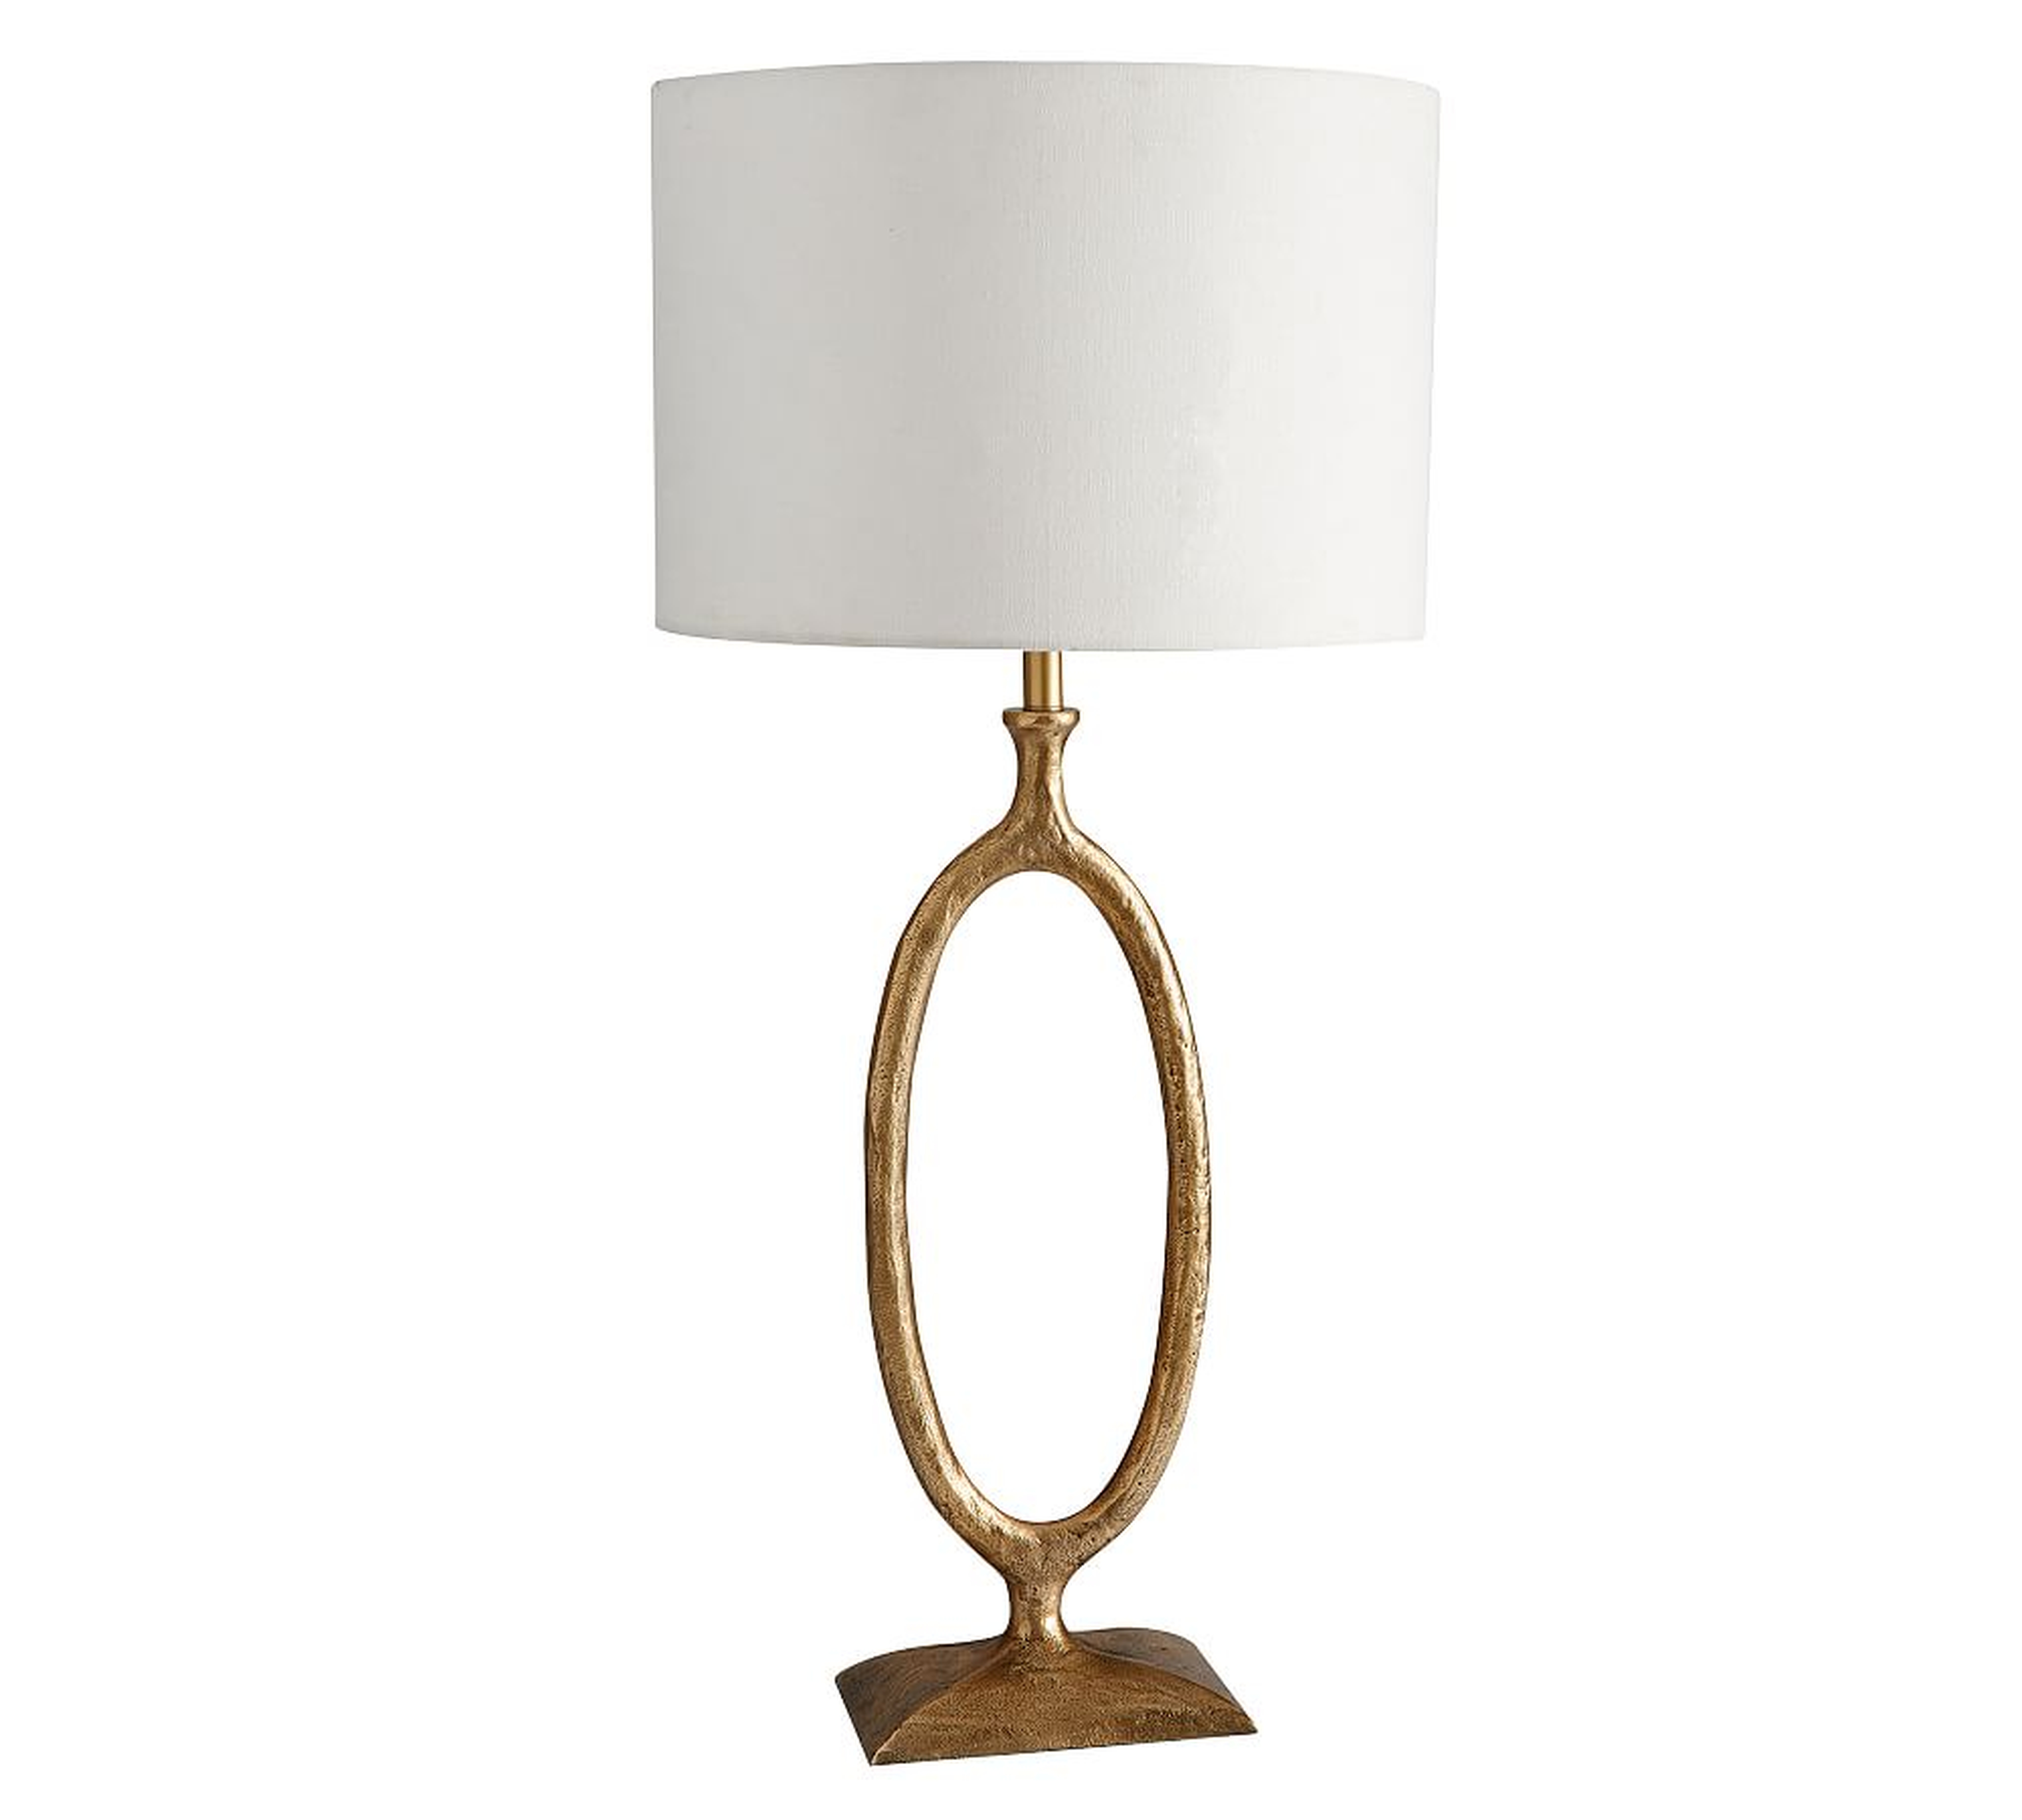 Easton Forged-Iron 23" Table Lamp, Forged Iron Brass, Oval - Pottery Barn